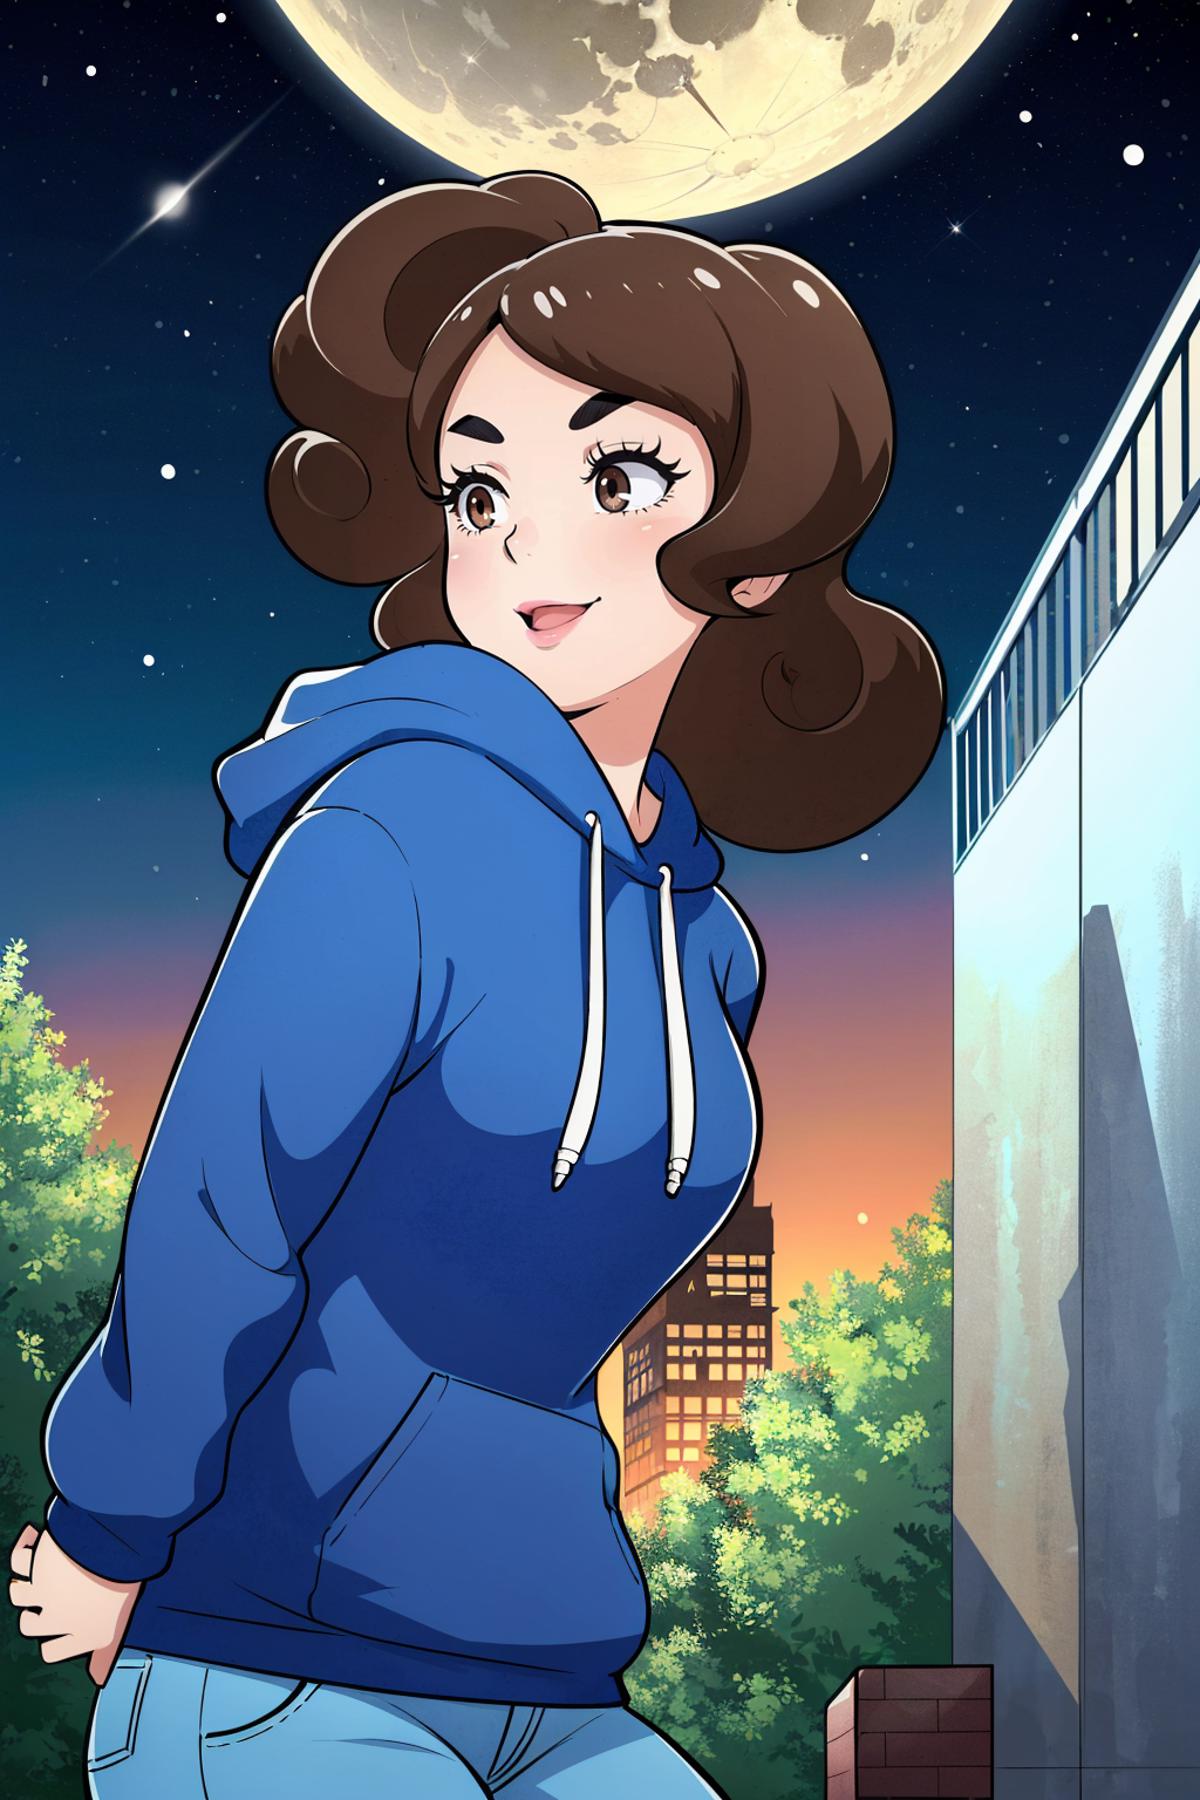 A woman wearing a blue hoodie standing in front of a building at night.